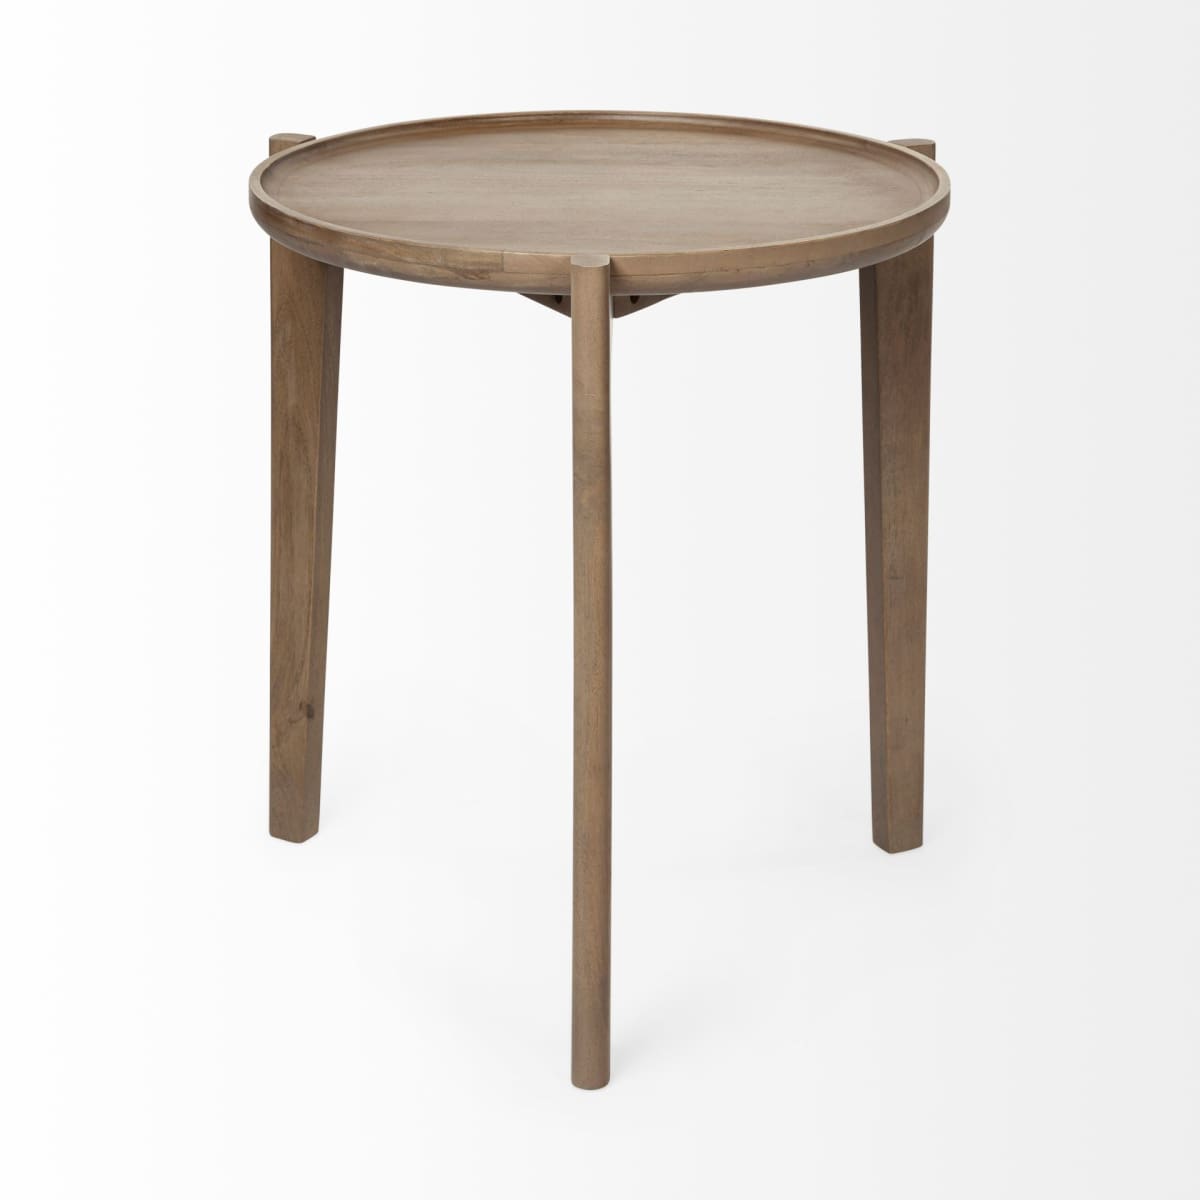 Cleaver Accent Table Brown Wood - accent-tables